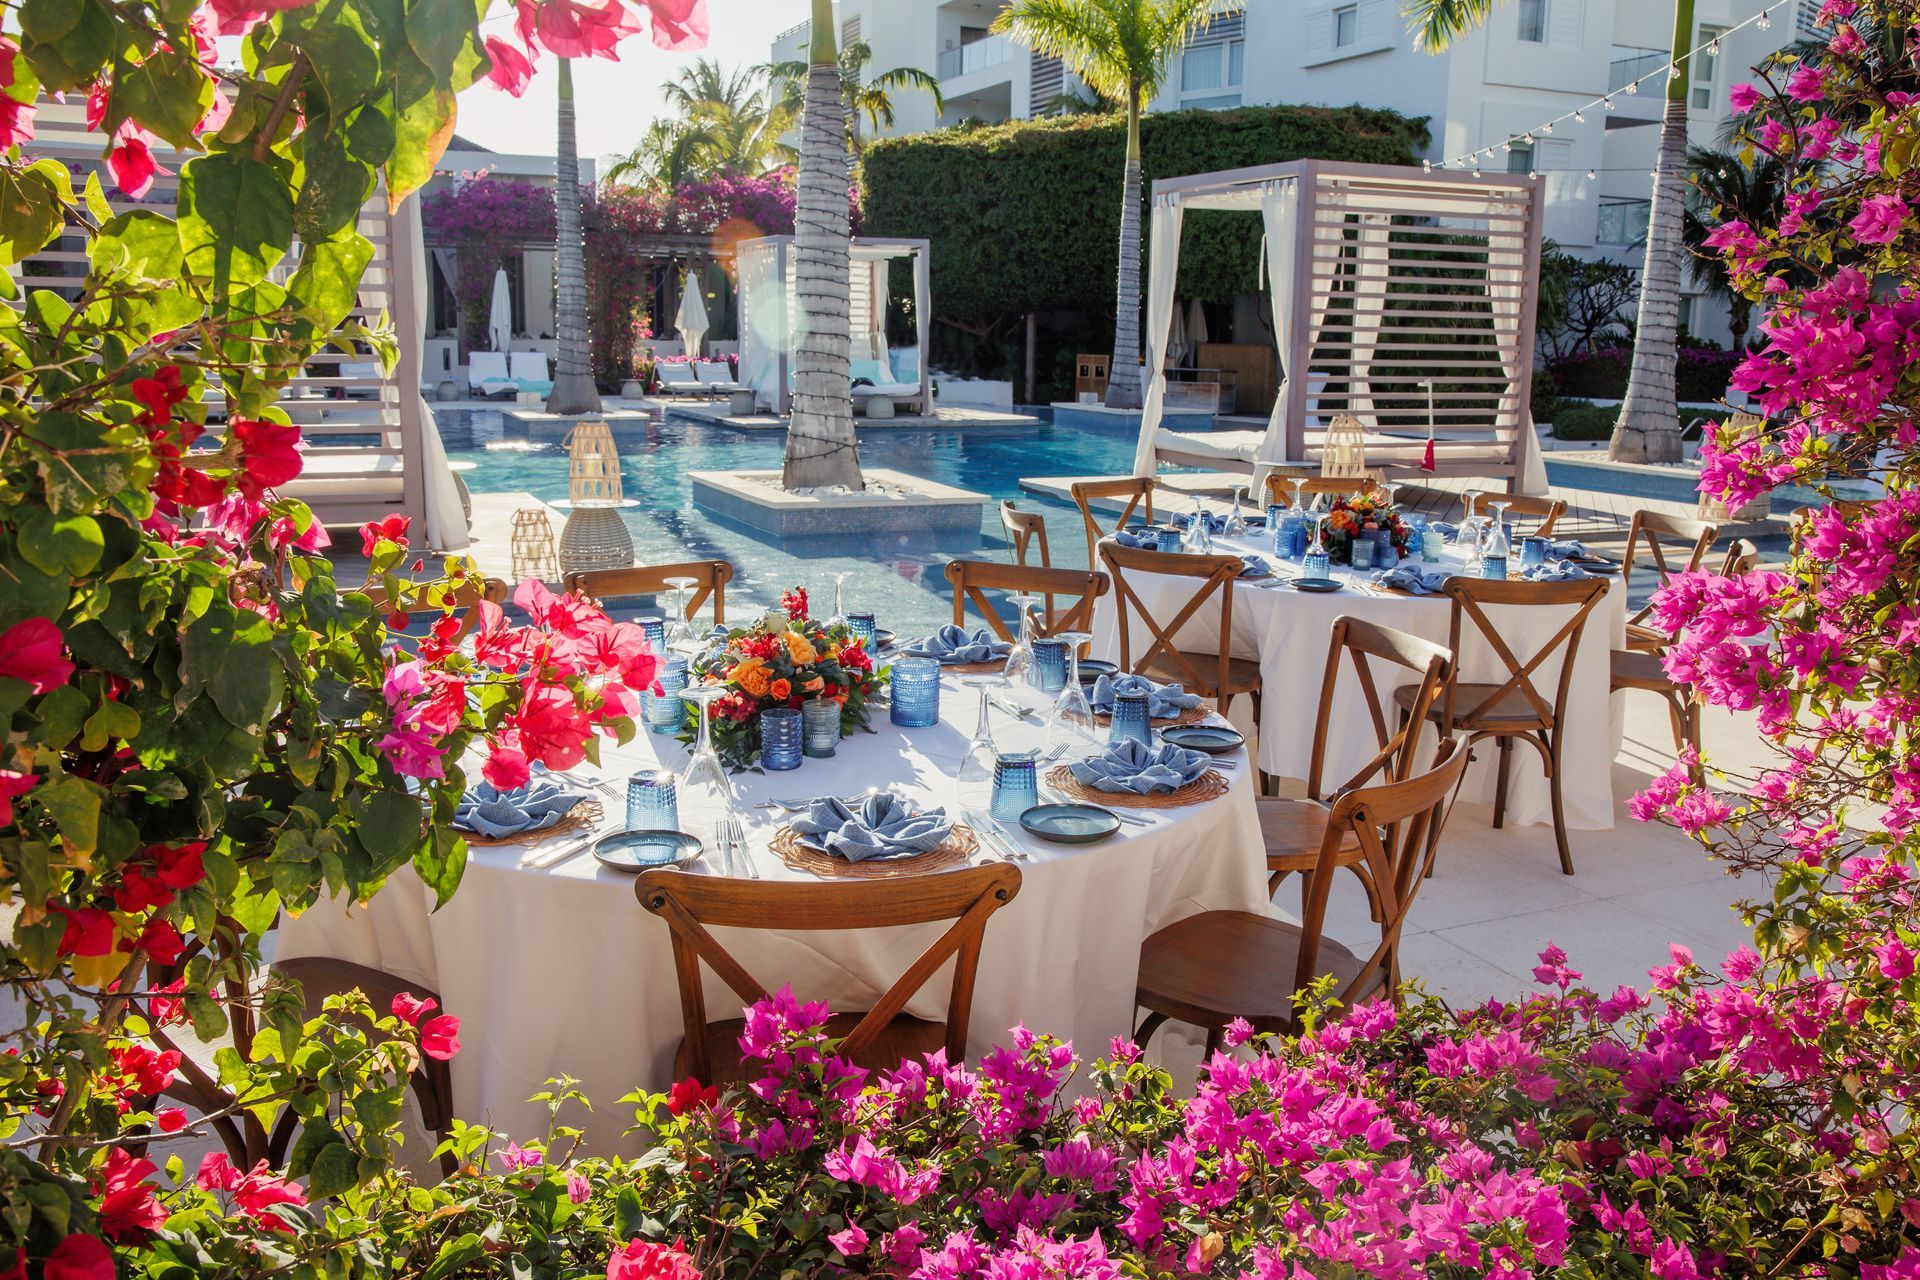 Poolside event space at Wymara Resort an+ Villas Turks and Caicos